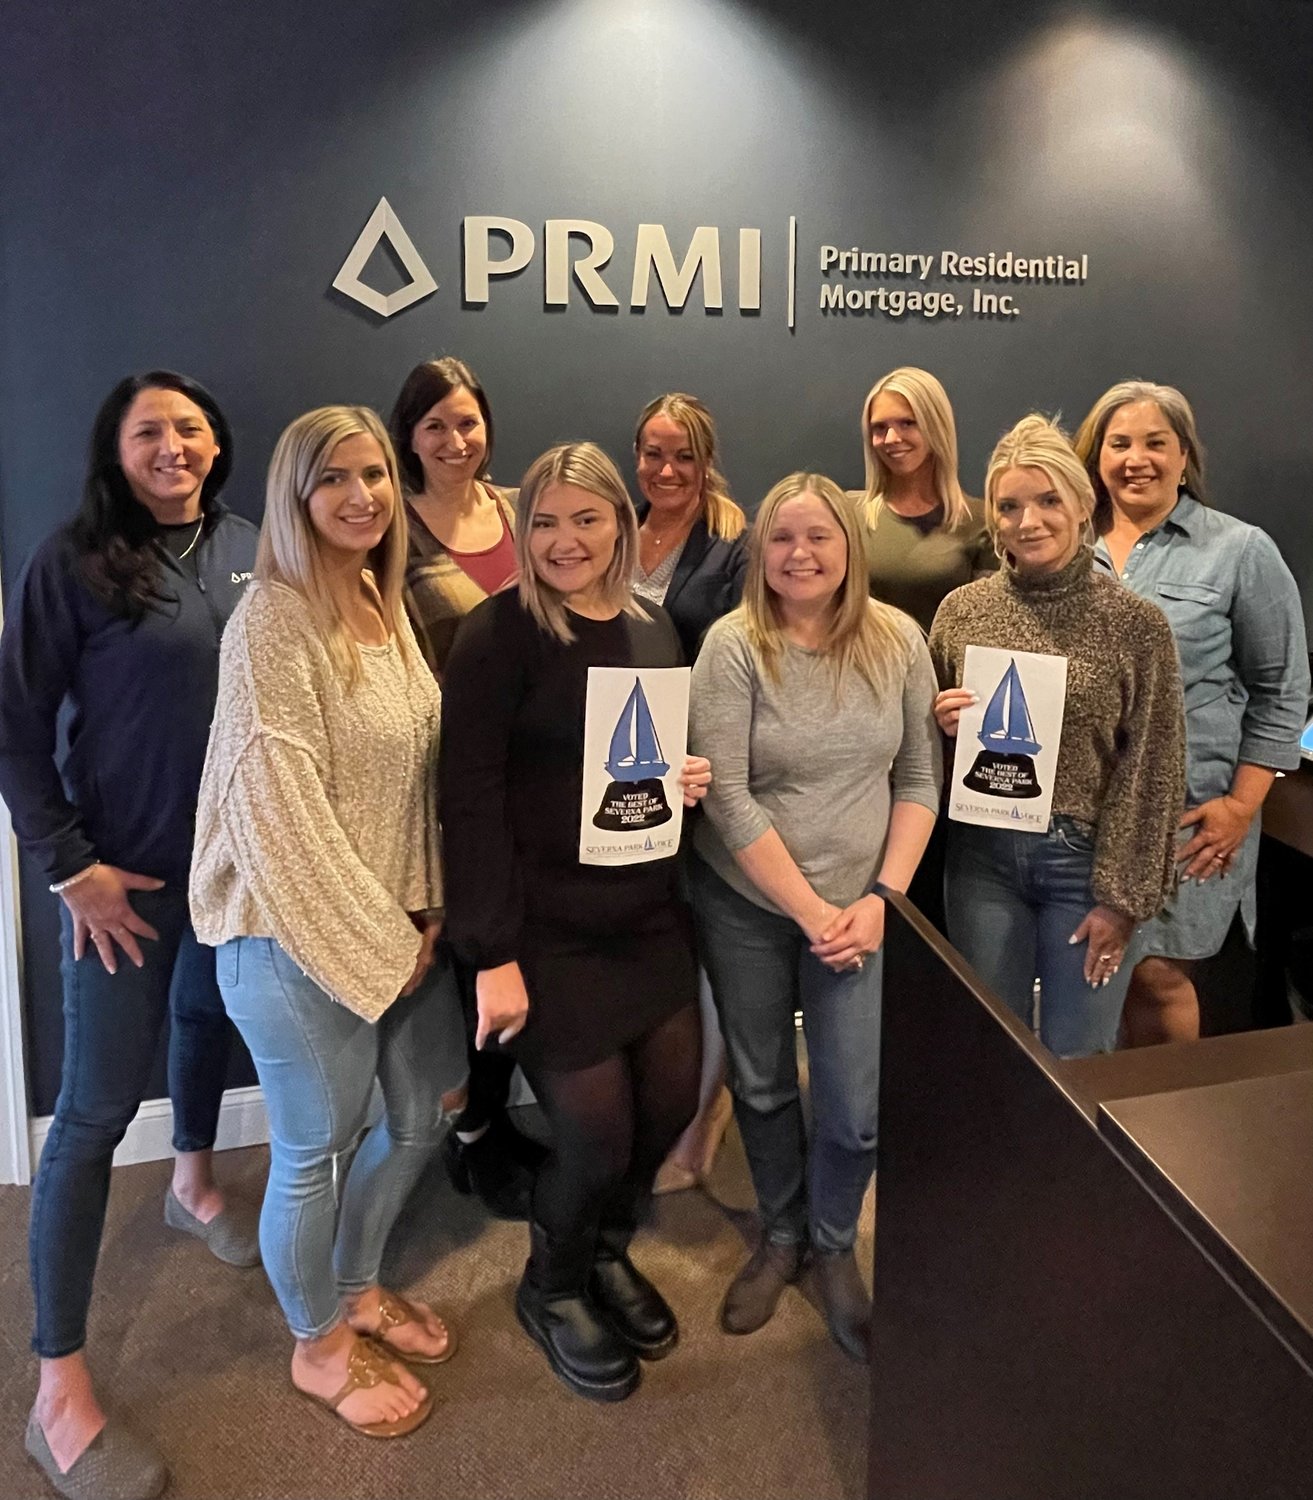 The Primary Residential Mortgage Inc. (PRMI) team, led by Kyndle Quinones, proudly accepted the award for Best Mortgage Company.